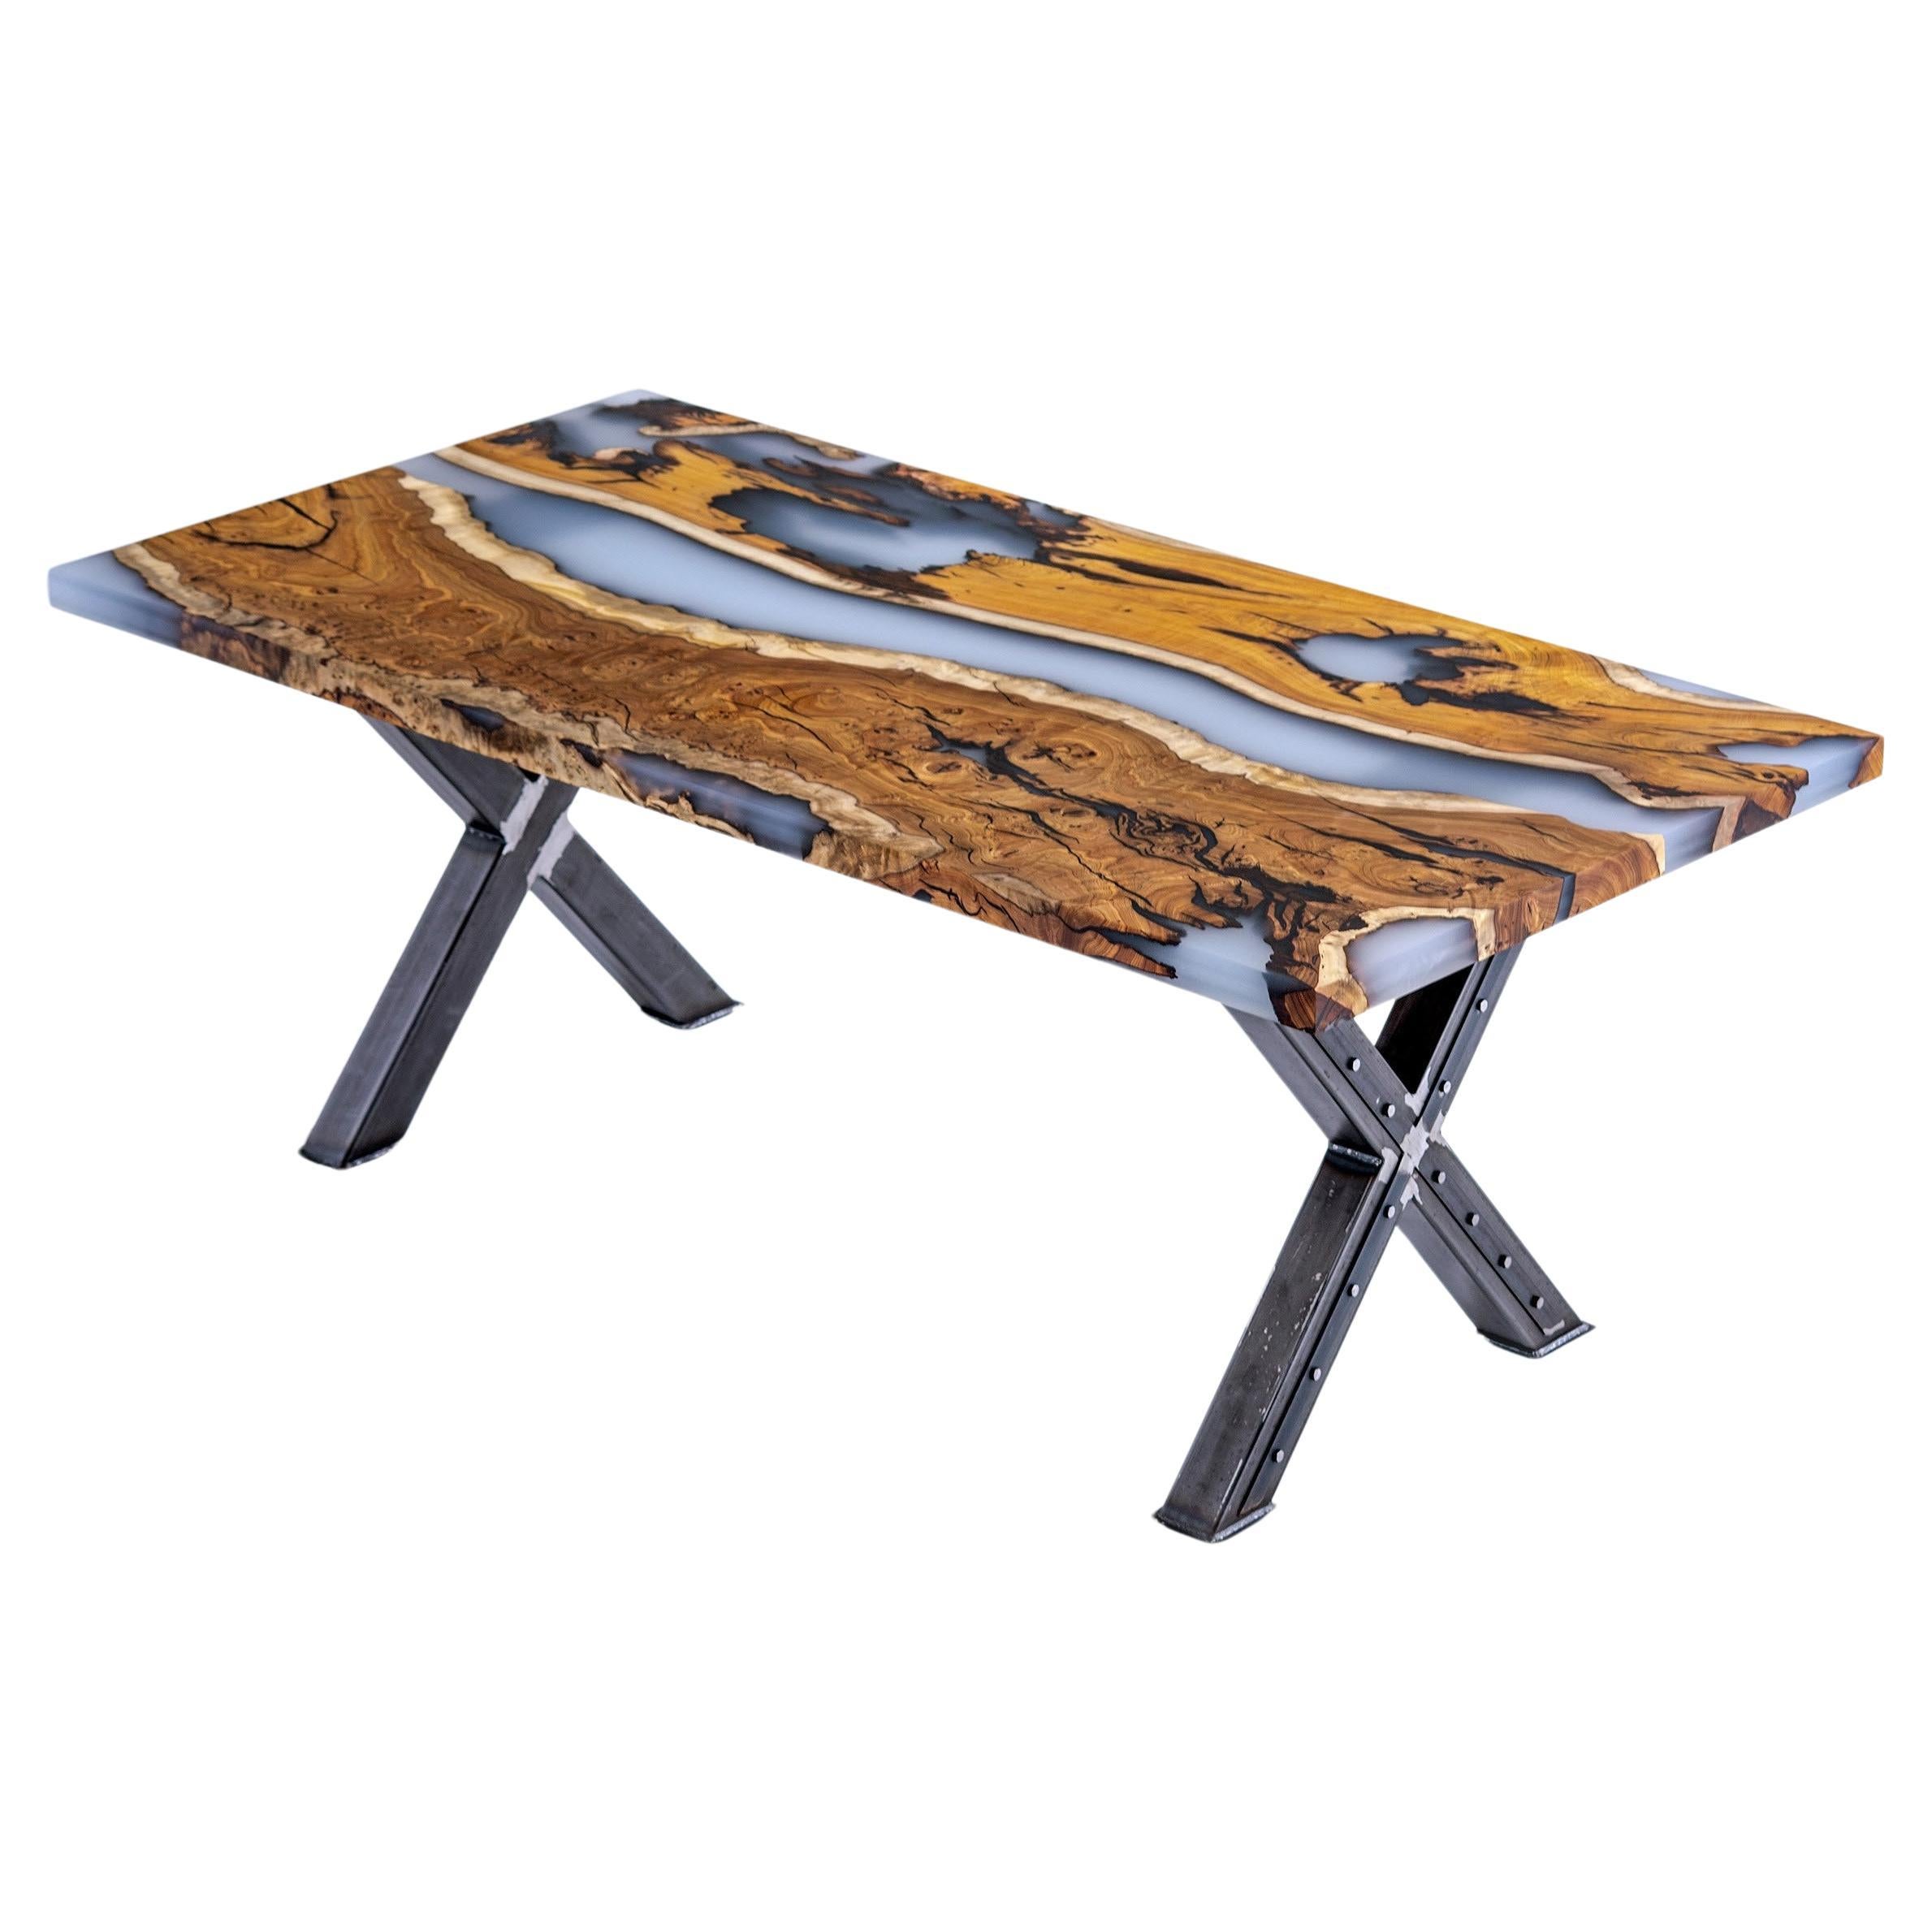 Hackberry Wood Smoke Epoxy Resin Modern River Dining Table For Sale